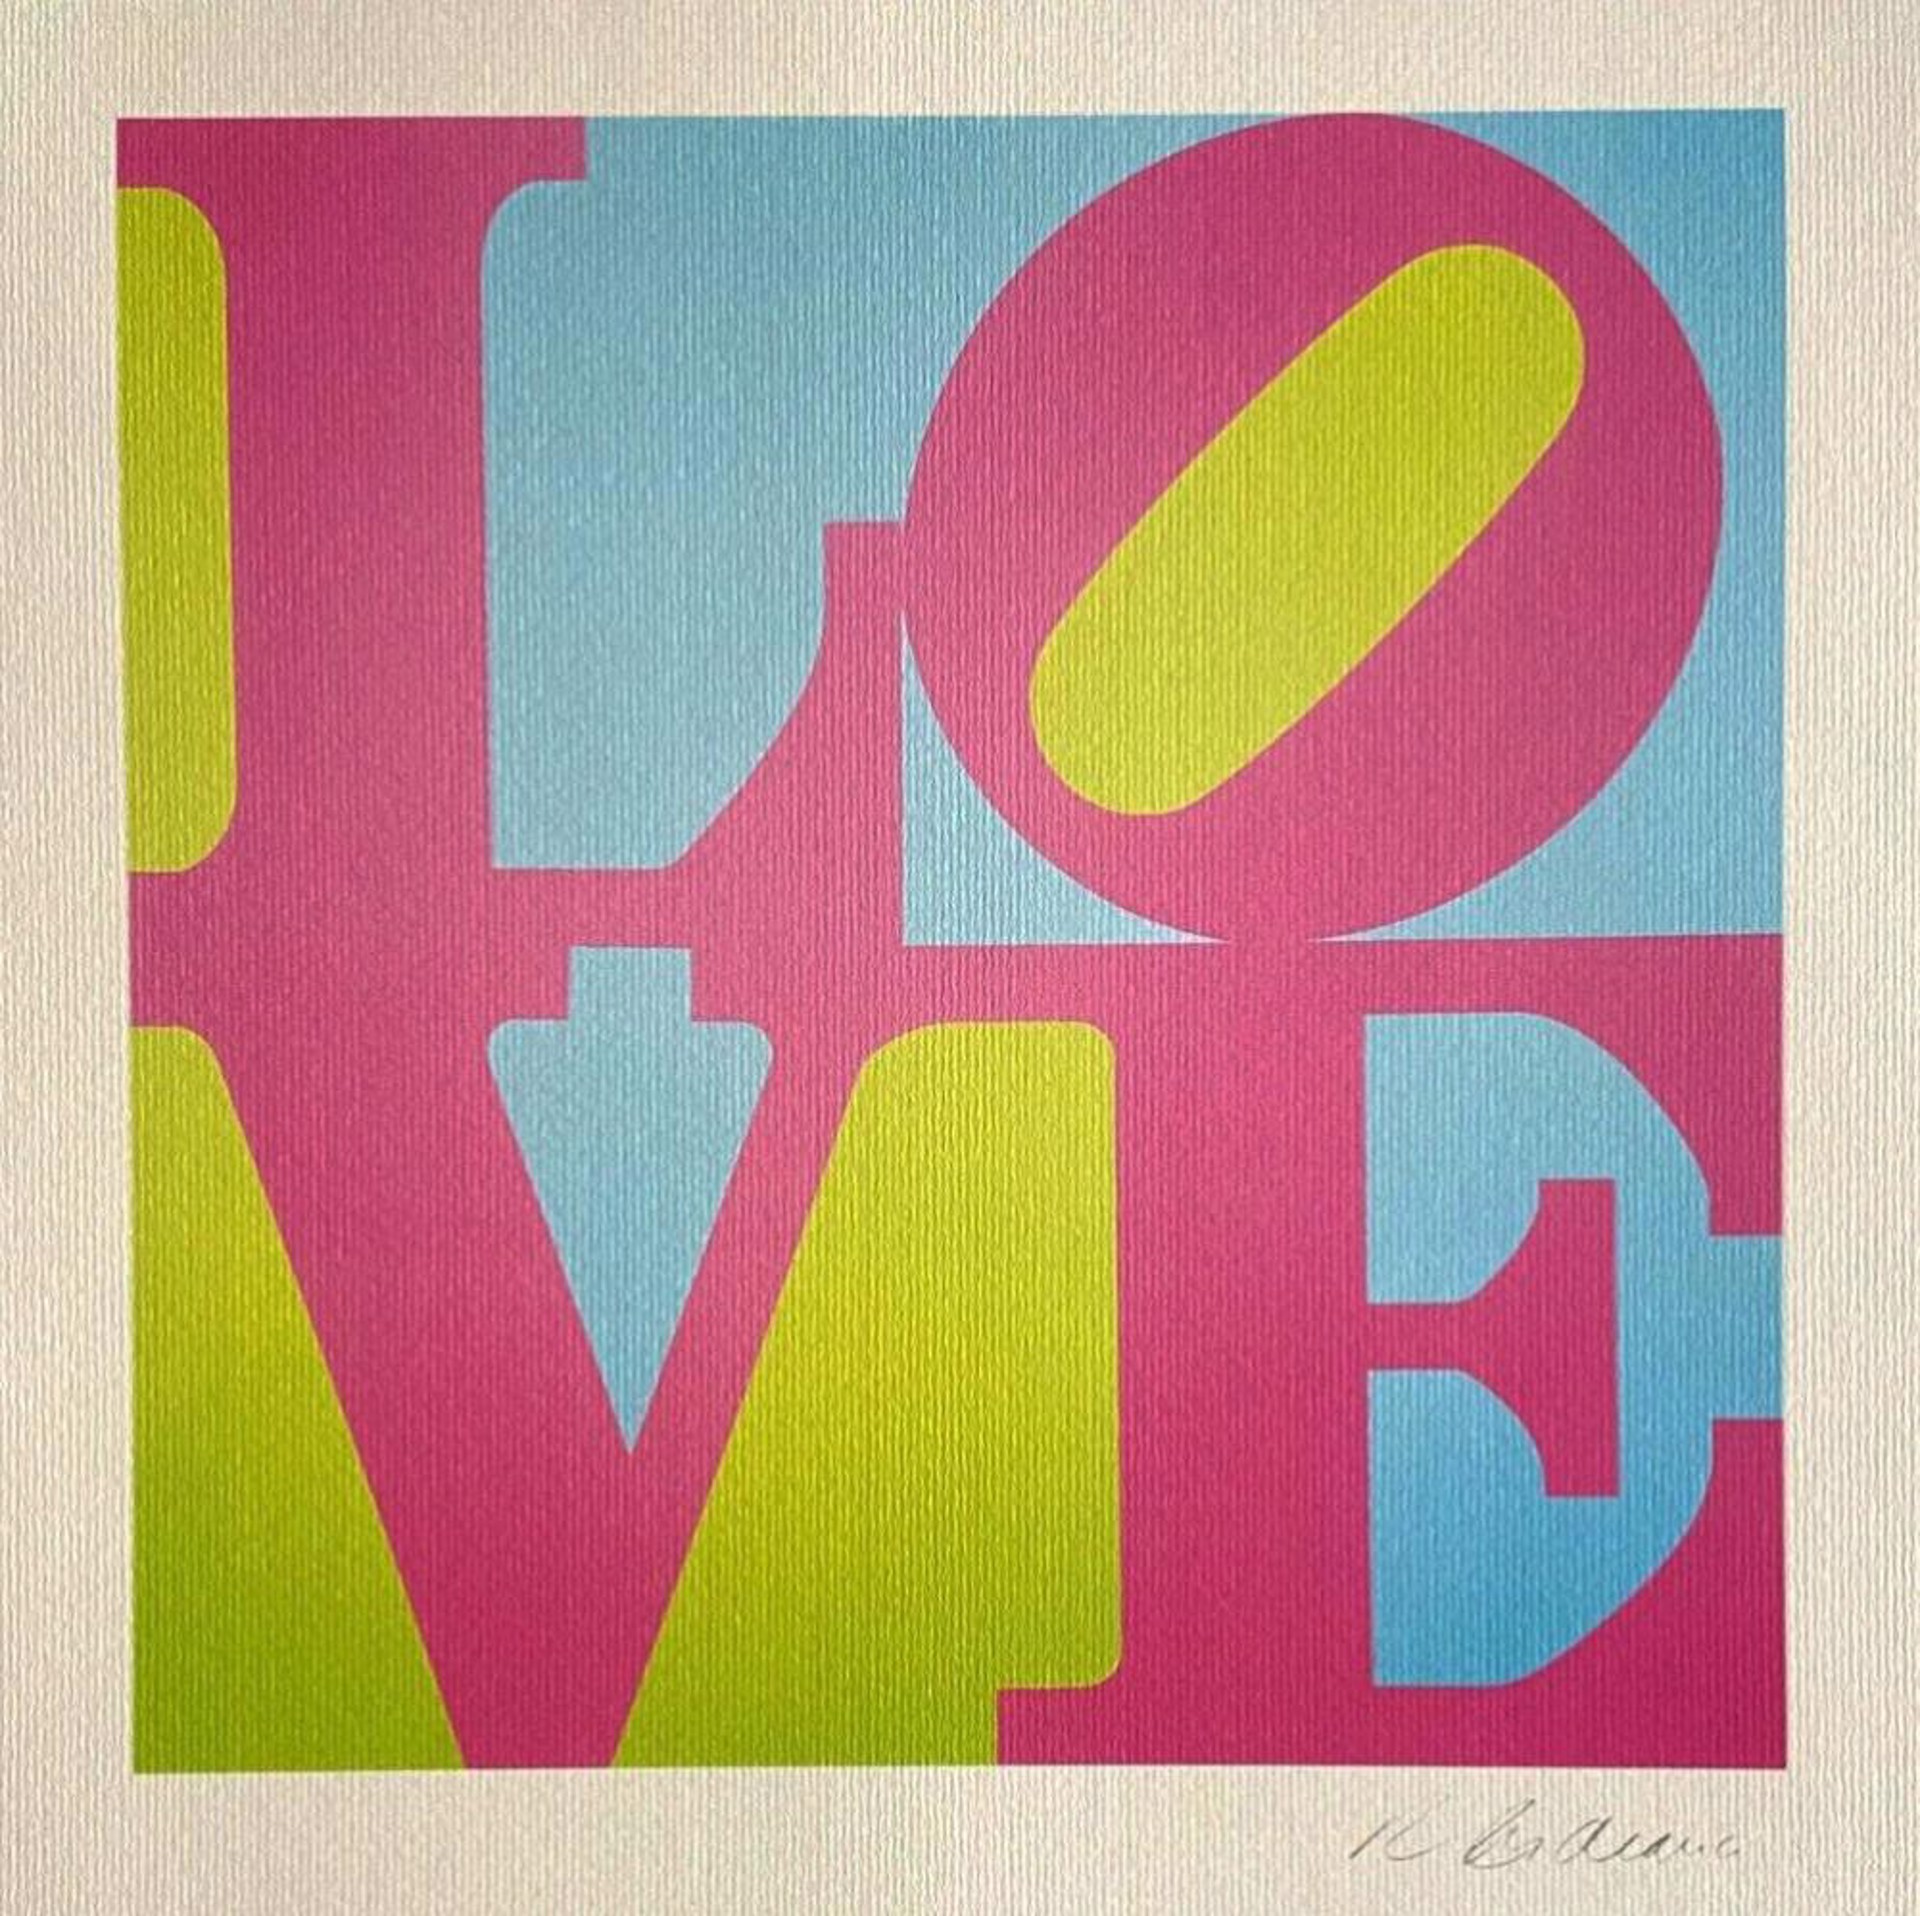 LOVE (Green, Pink, Blue) by Robert Indiana